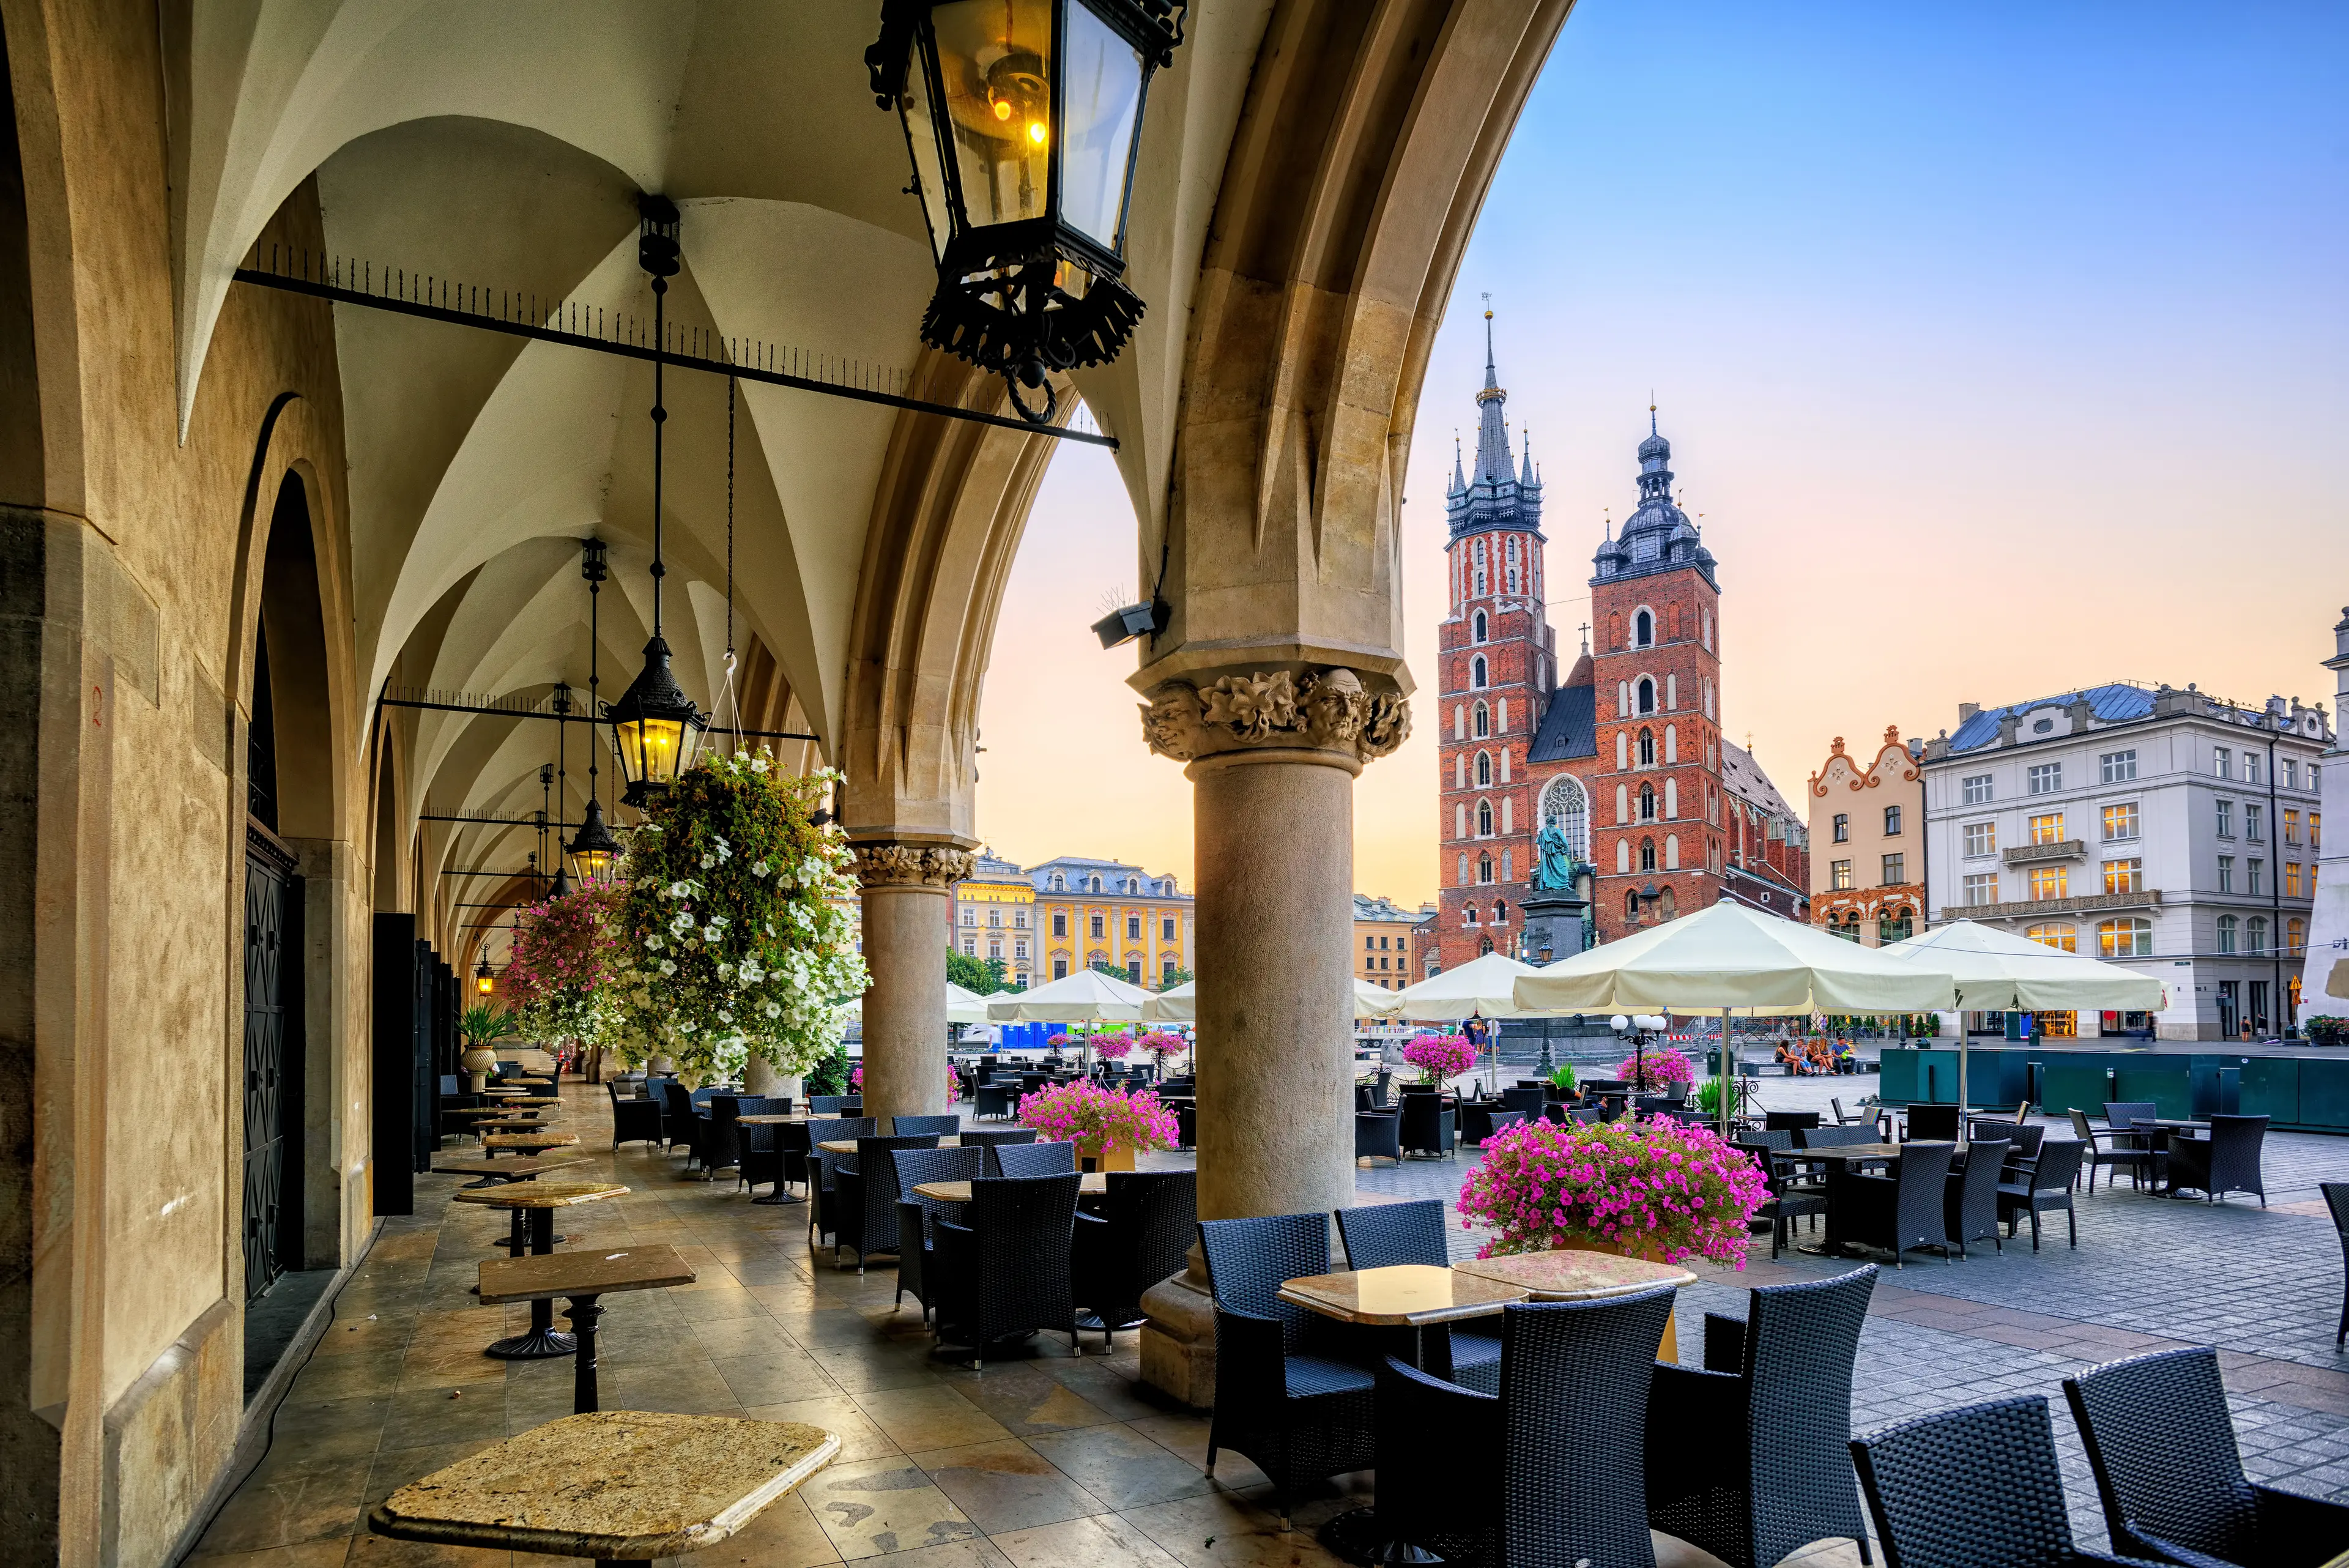 Solo 2-Day Sightseeing and Shopping Adventure in Krakow, Poland